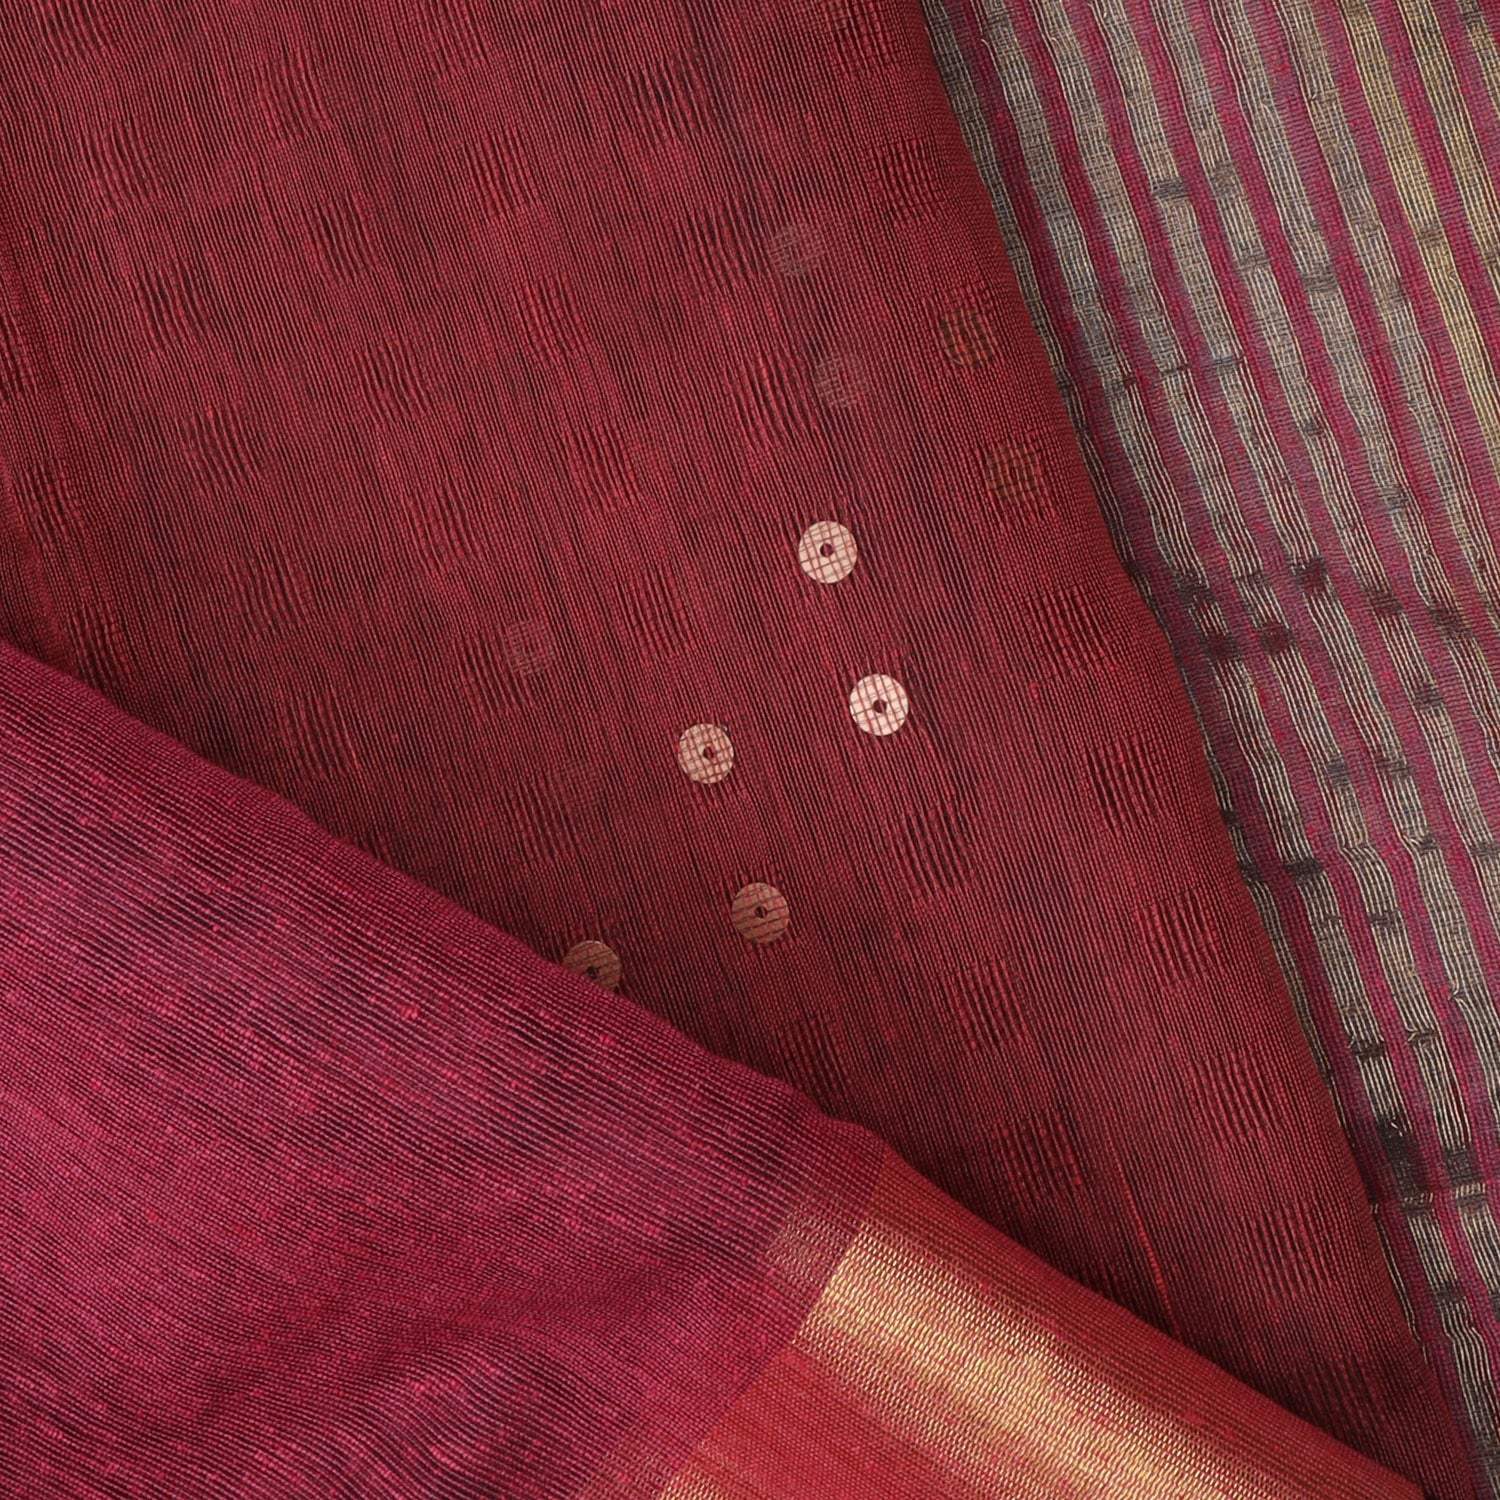 Plum Brown Matka Silk Saree With Sequin Embroidery - Singhania's